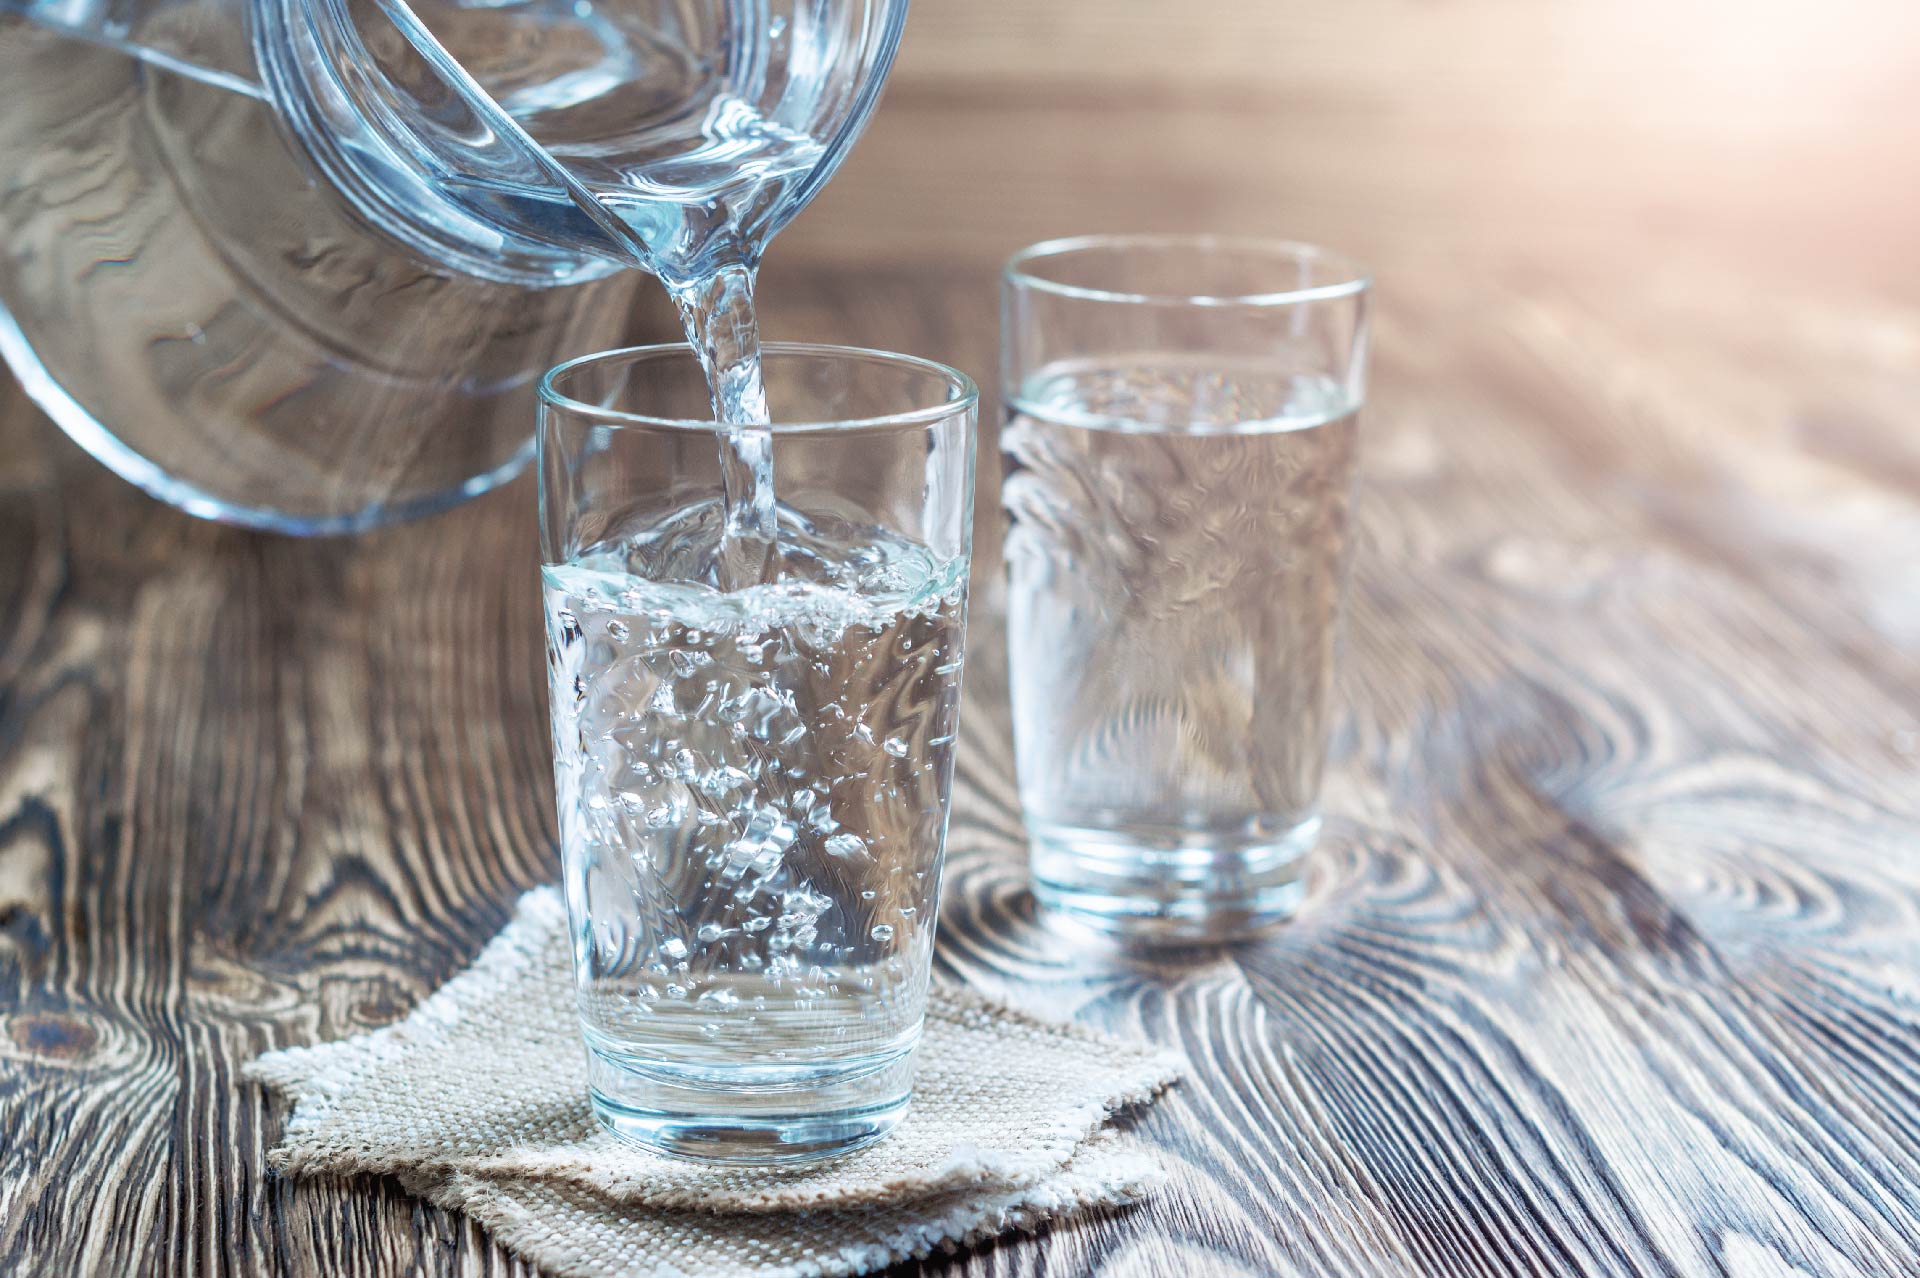 10 Reasons Why You Should Get a Water Filtration System